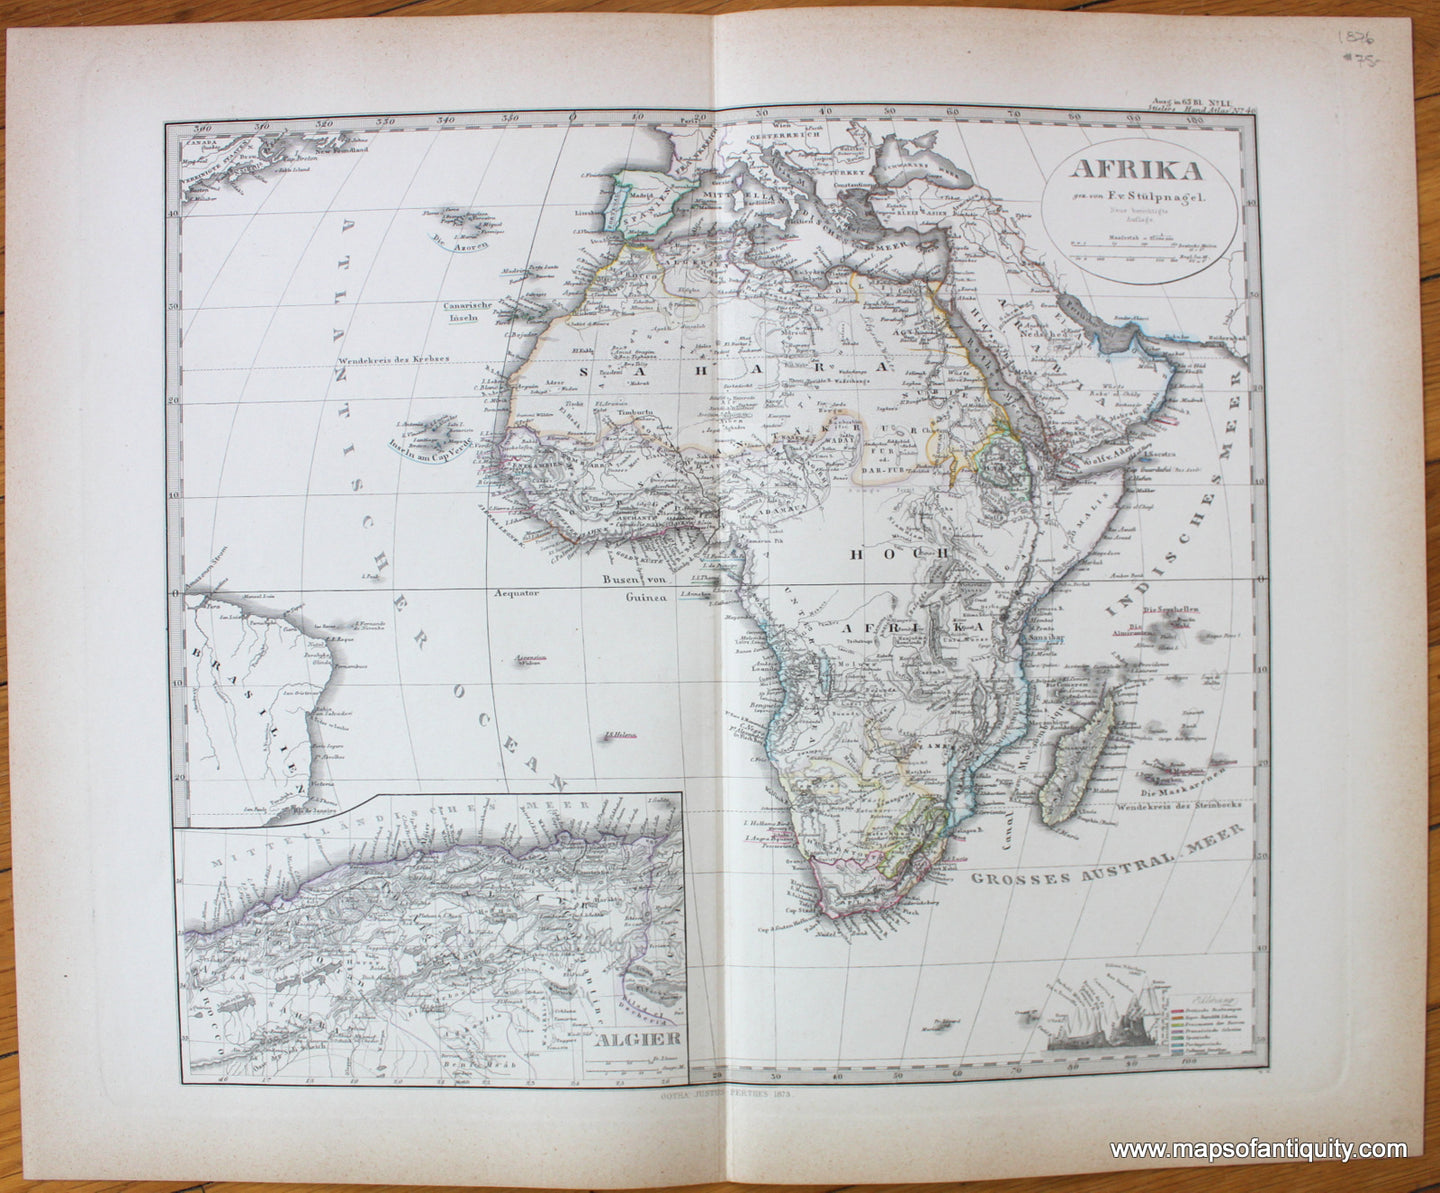 Antique-Map-Afrika-Africa-Stieler-1876-1870s-1800s-19th-century-Maps-of-Antiquity